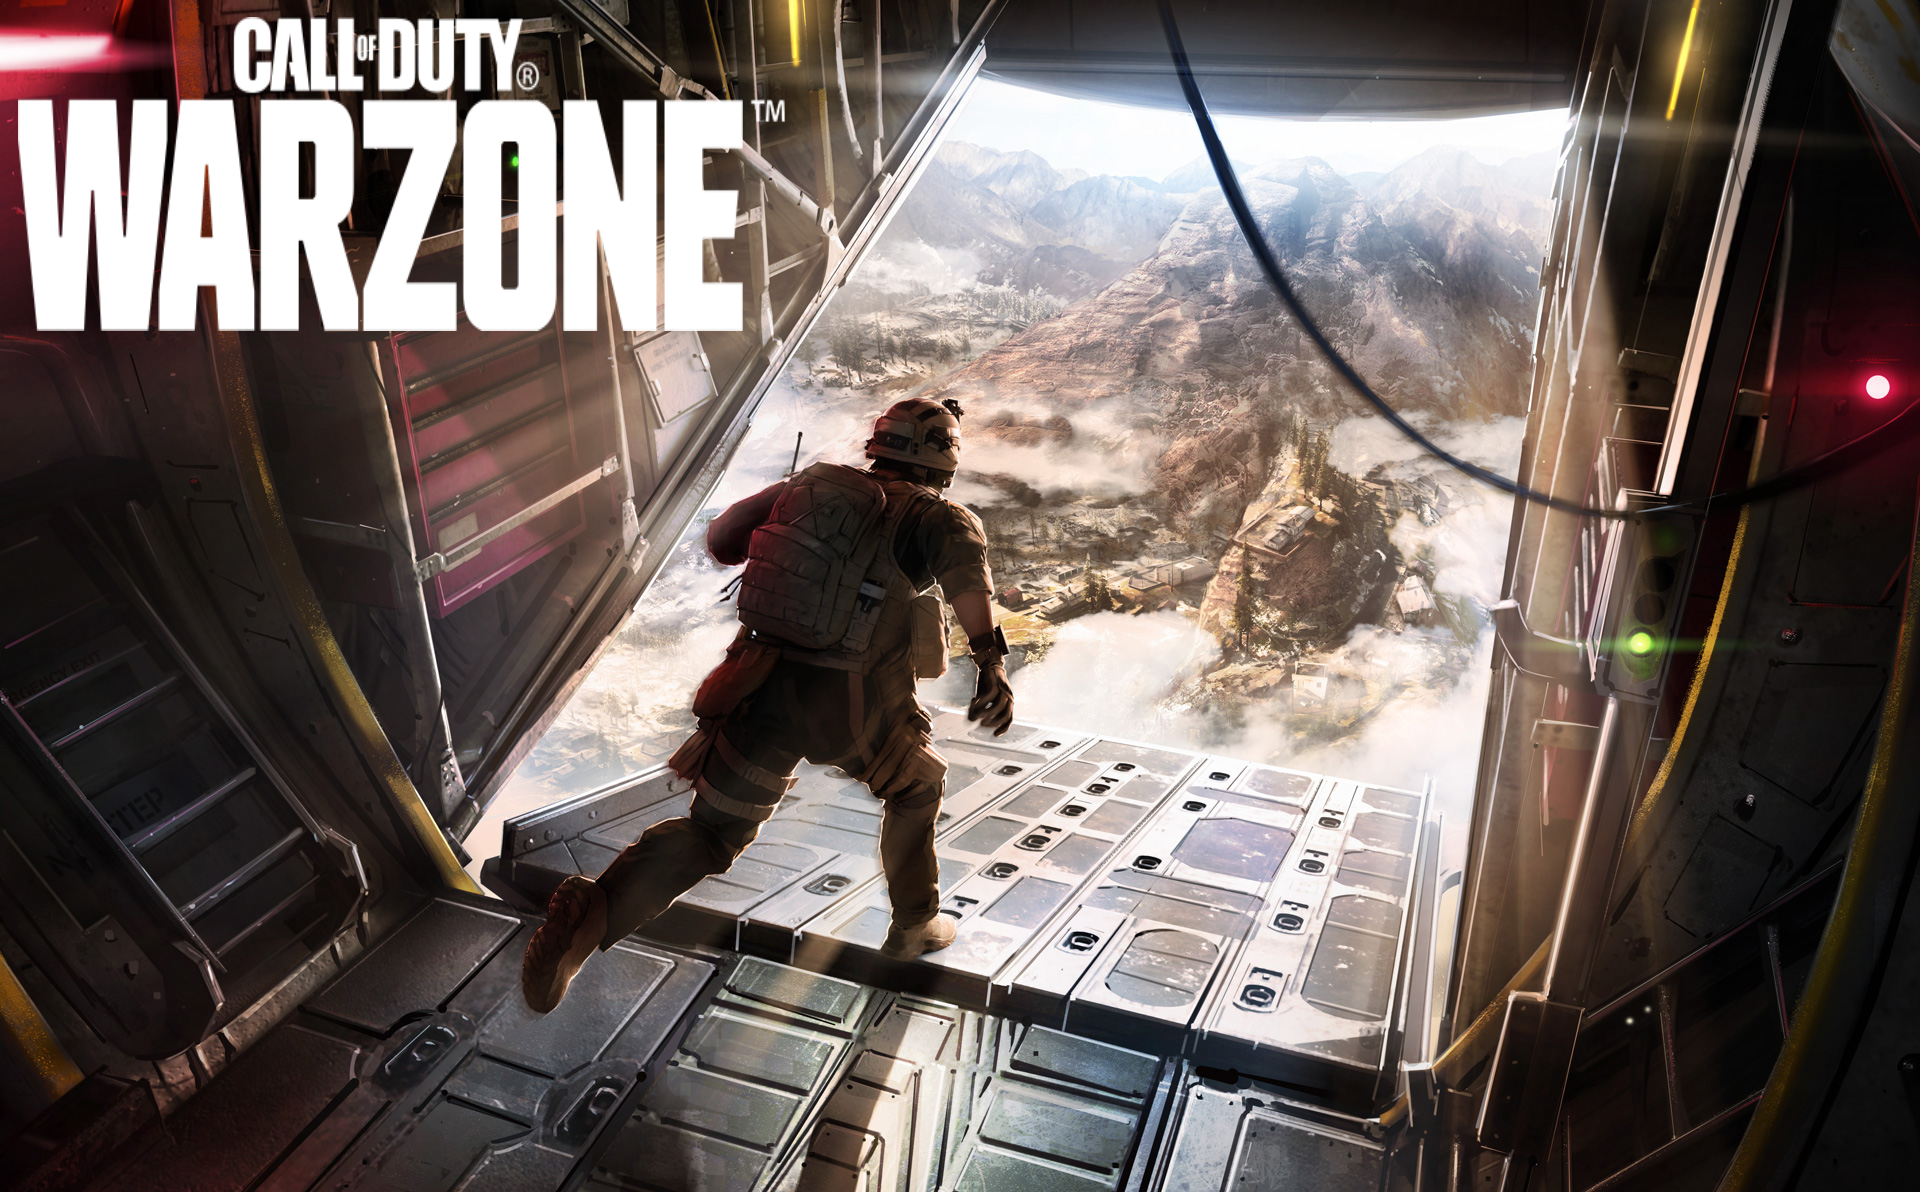 CALL OF DUTY WARZONE FOR MOBILE ANNOUNCE HERO